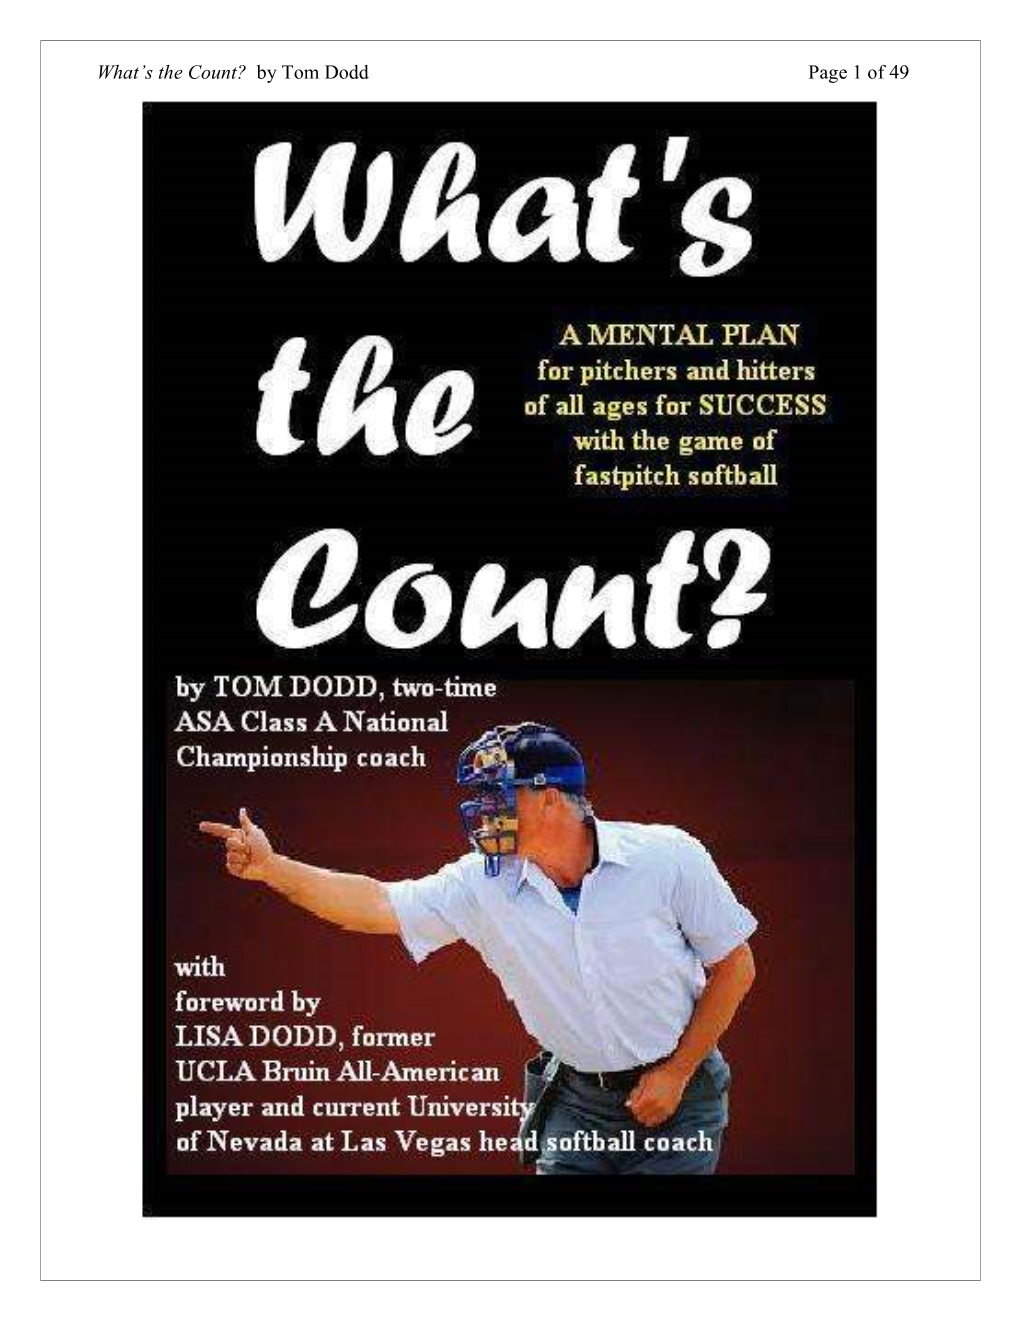 What's the Count? Focuses Totally on the Mental Game, and Specifically on How to Get the Advantage in the Ongoing Pitcher/Batter Battles